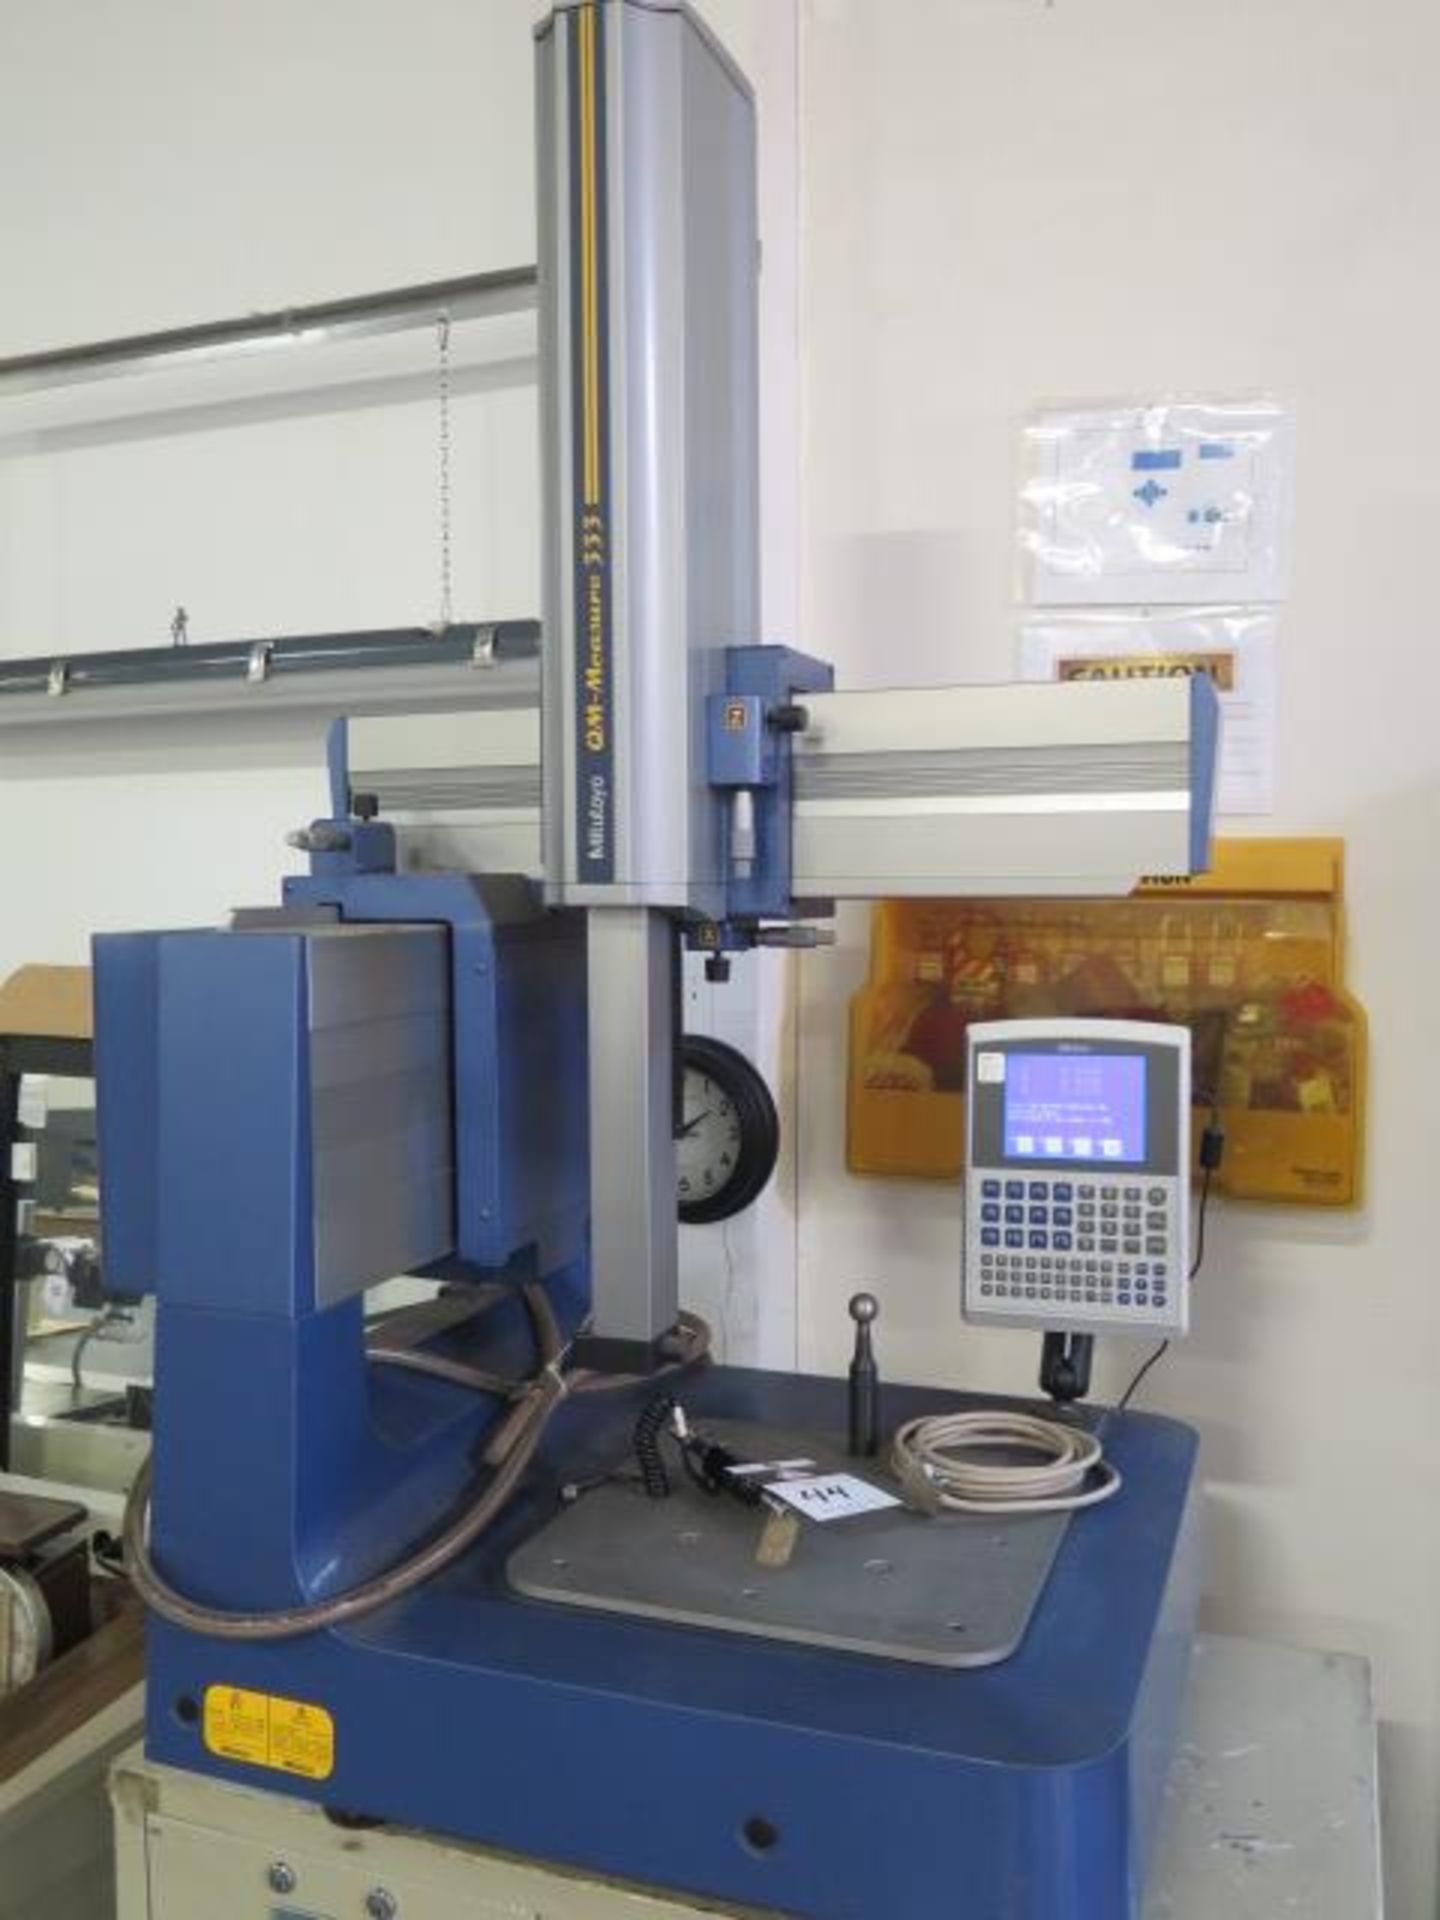 2010 Mitutoyo Measure 333 Manual CMM s/n BC000113 w/ Mitutoyo Programmable DRO, Renishaw, SOLD AS IS - Image 2 of 11